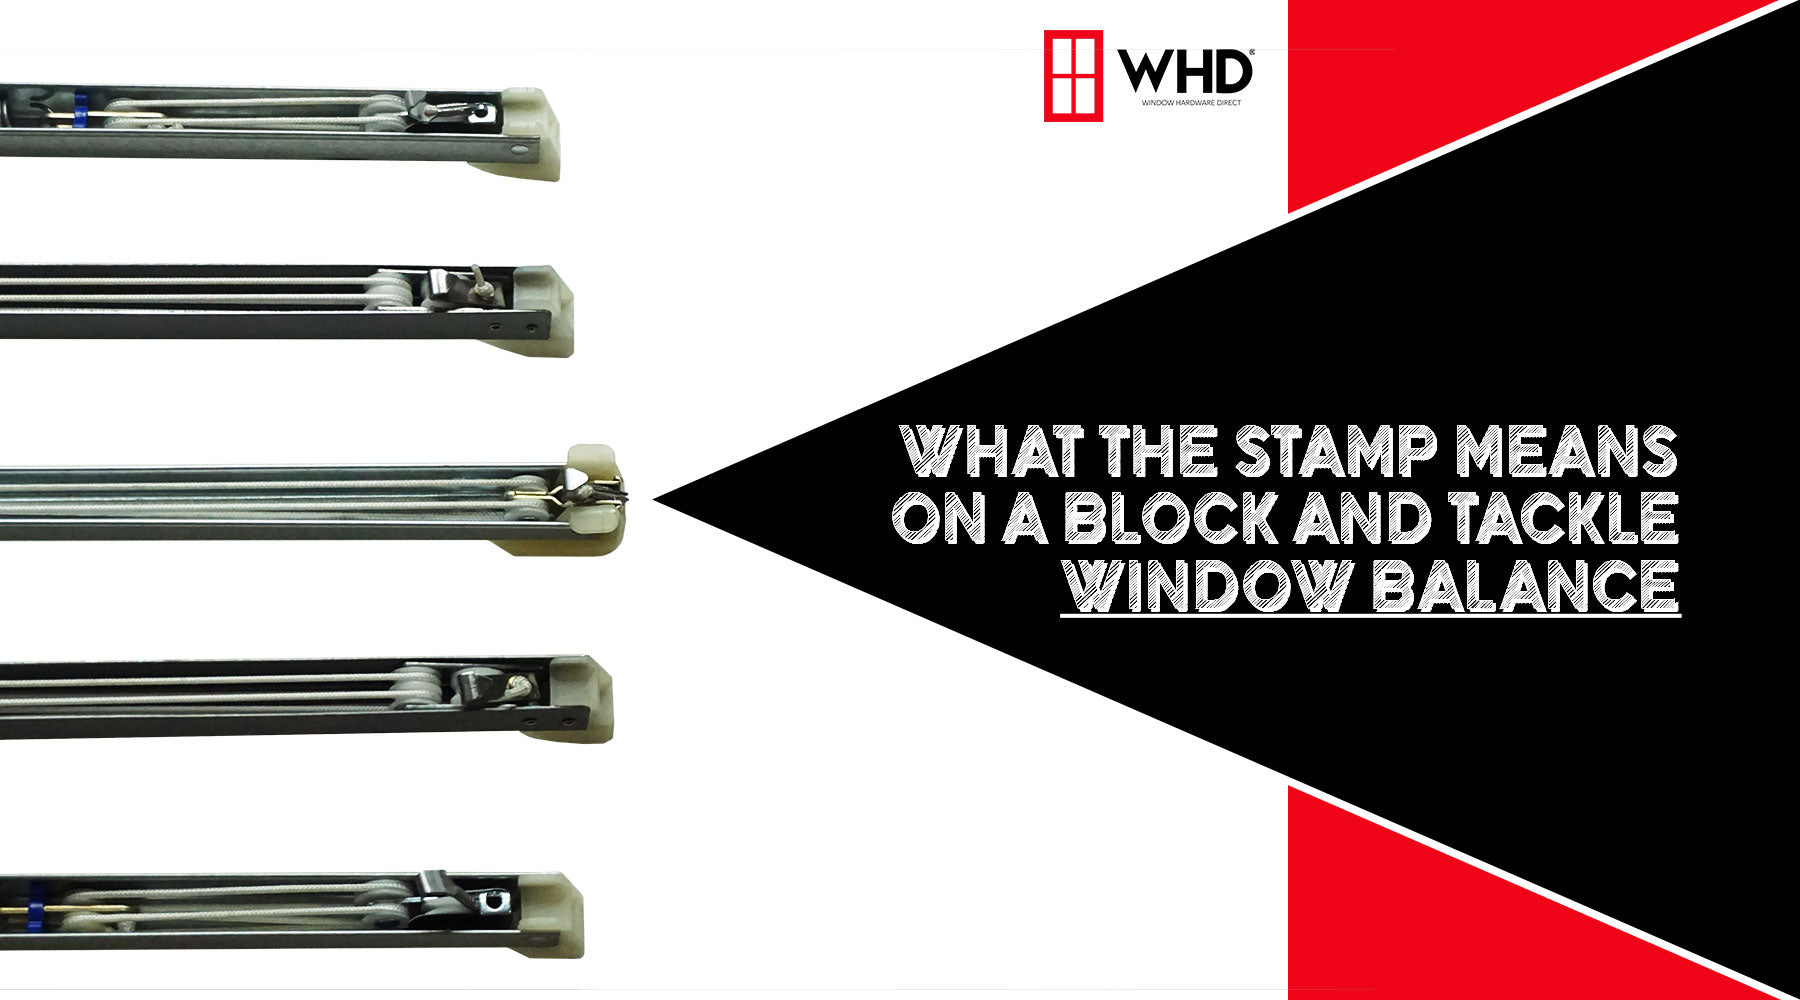 Block & Tackle Window Balances: Understanding the Meaning of Stamps